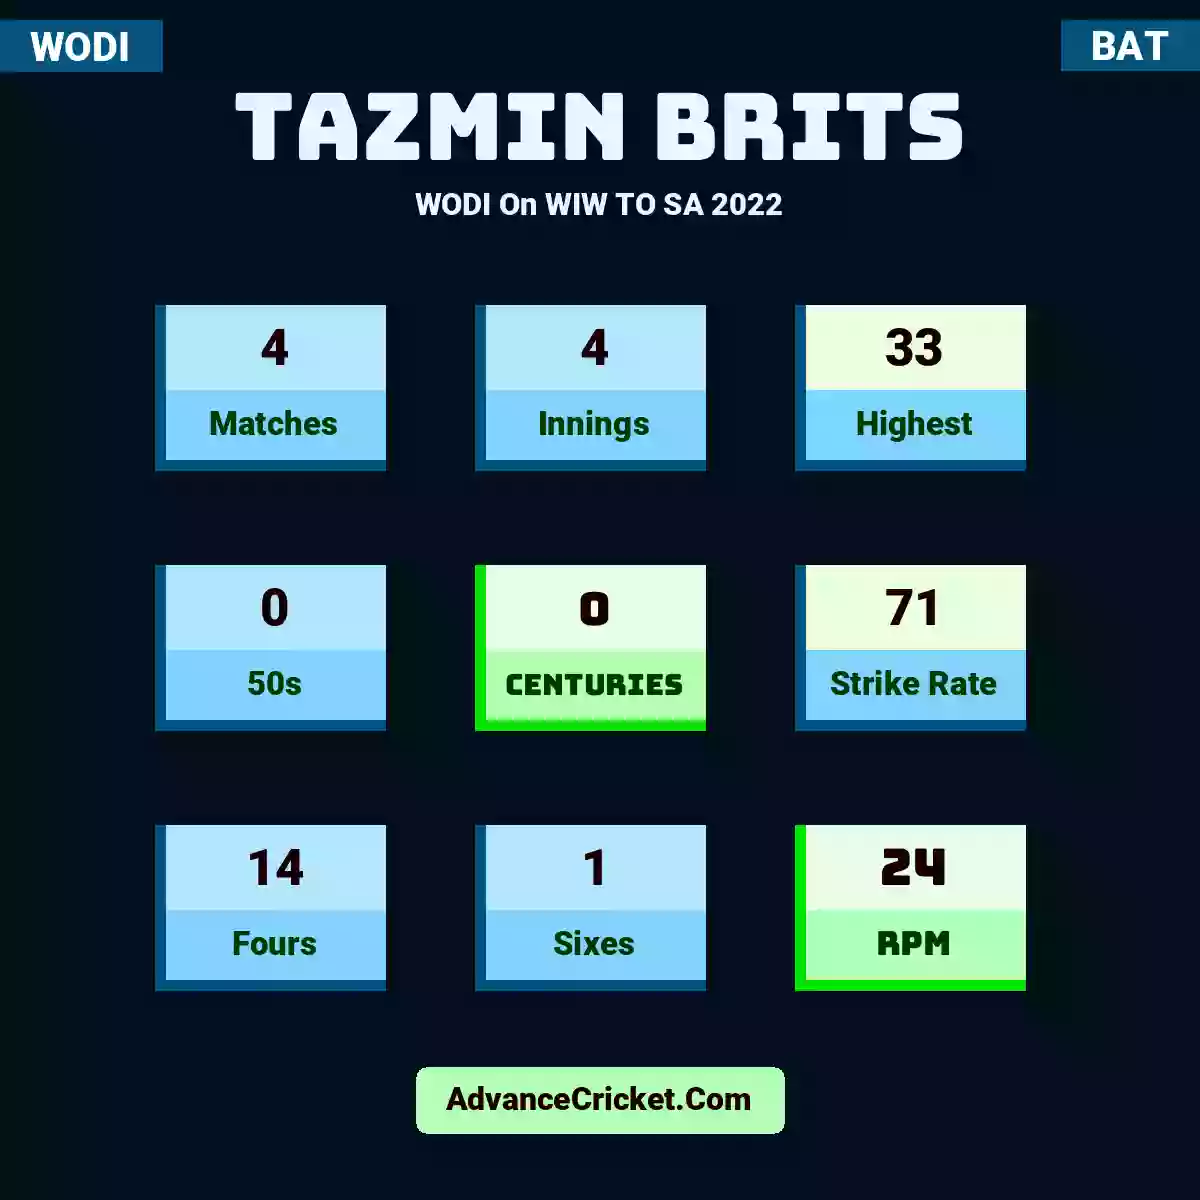 Tazmin Brits WODI  On WIW TO SA 2022, Tazmin Brits played 4 matches, scored 33 runs as highest, 0 half-centuries, and 0 centuries, with a strike rate of 71. T.Brits hit 14 fours and 1 sixes, with an RPM of 24.